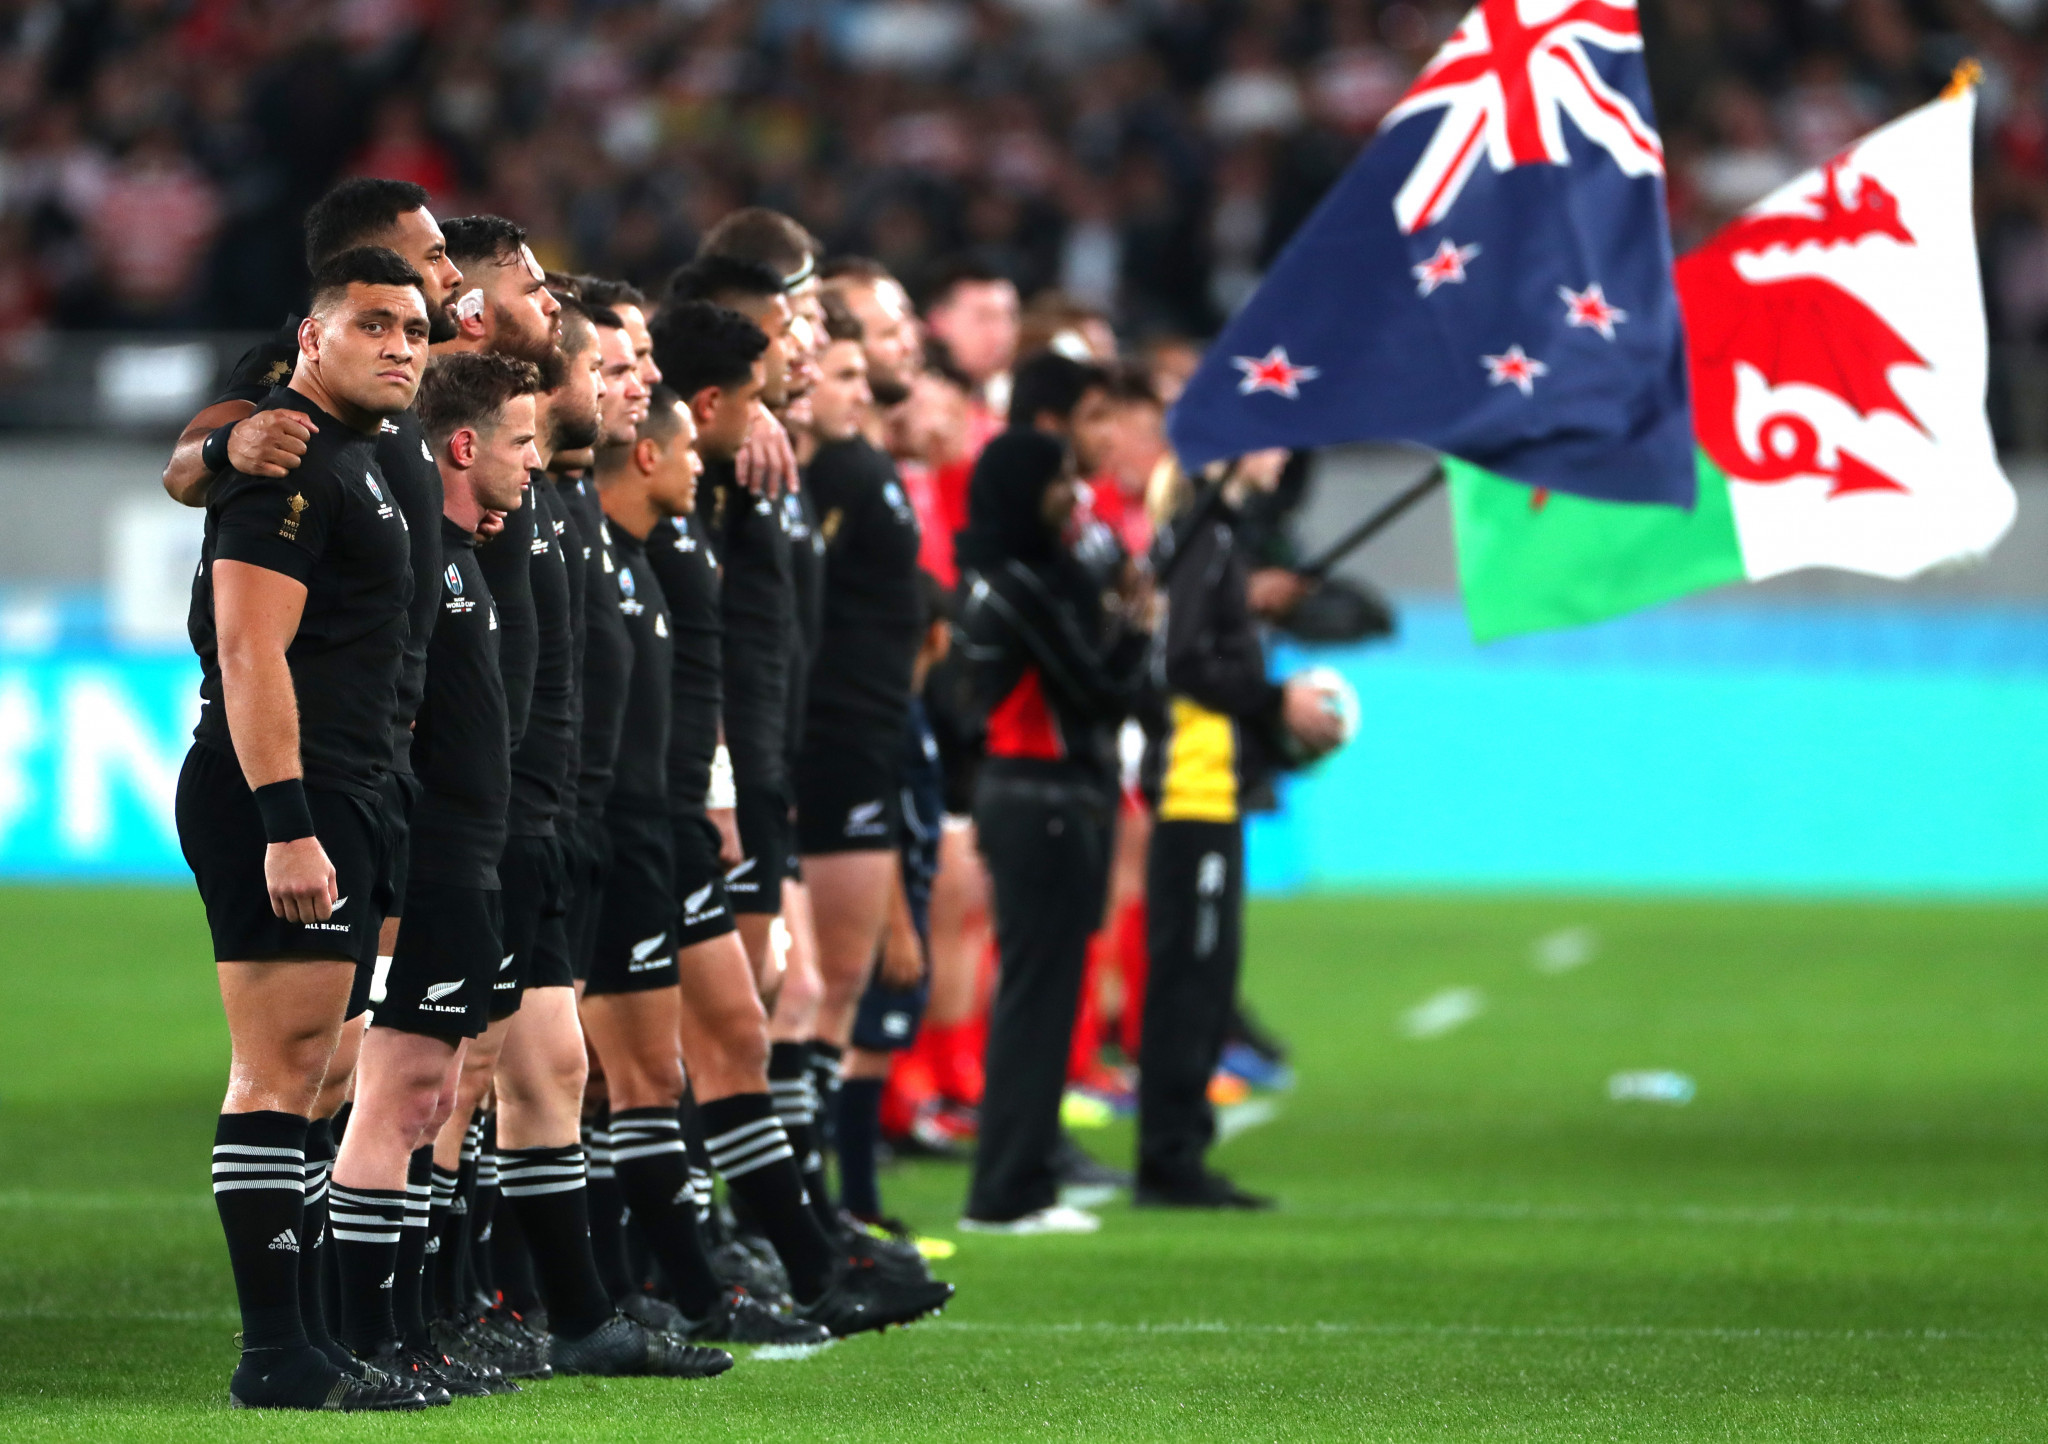 Two games between New Zealand and Wales are among those postponed ©Getty Images